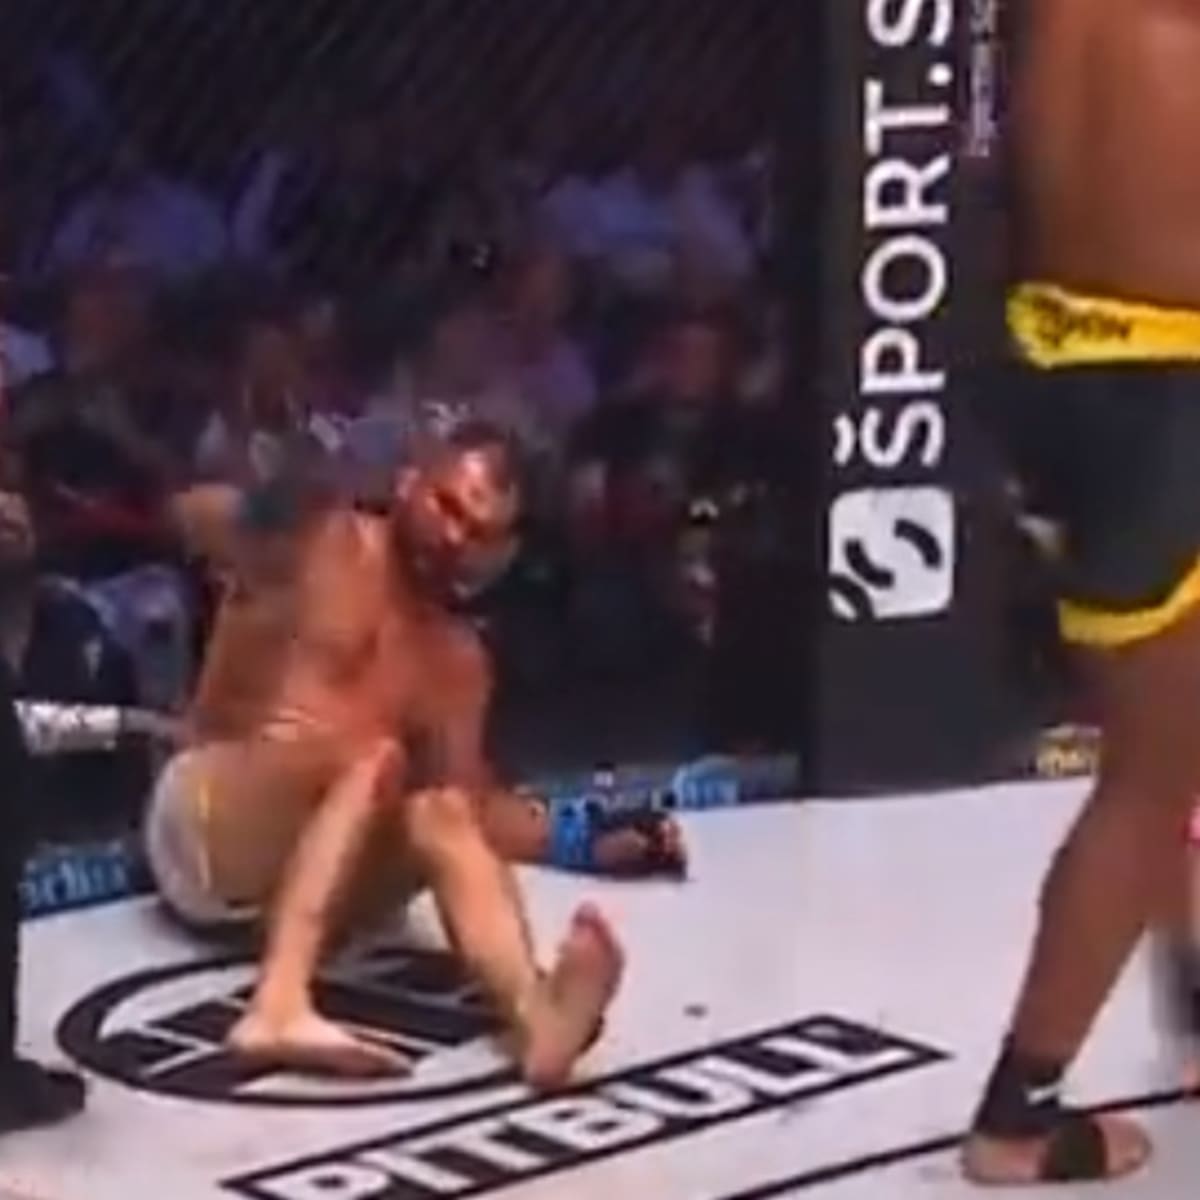 VIDEO: MMA Fighter Has Leg Snapped in Half by a Roundhouse Kick at